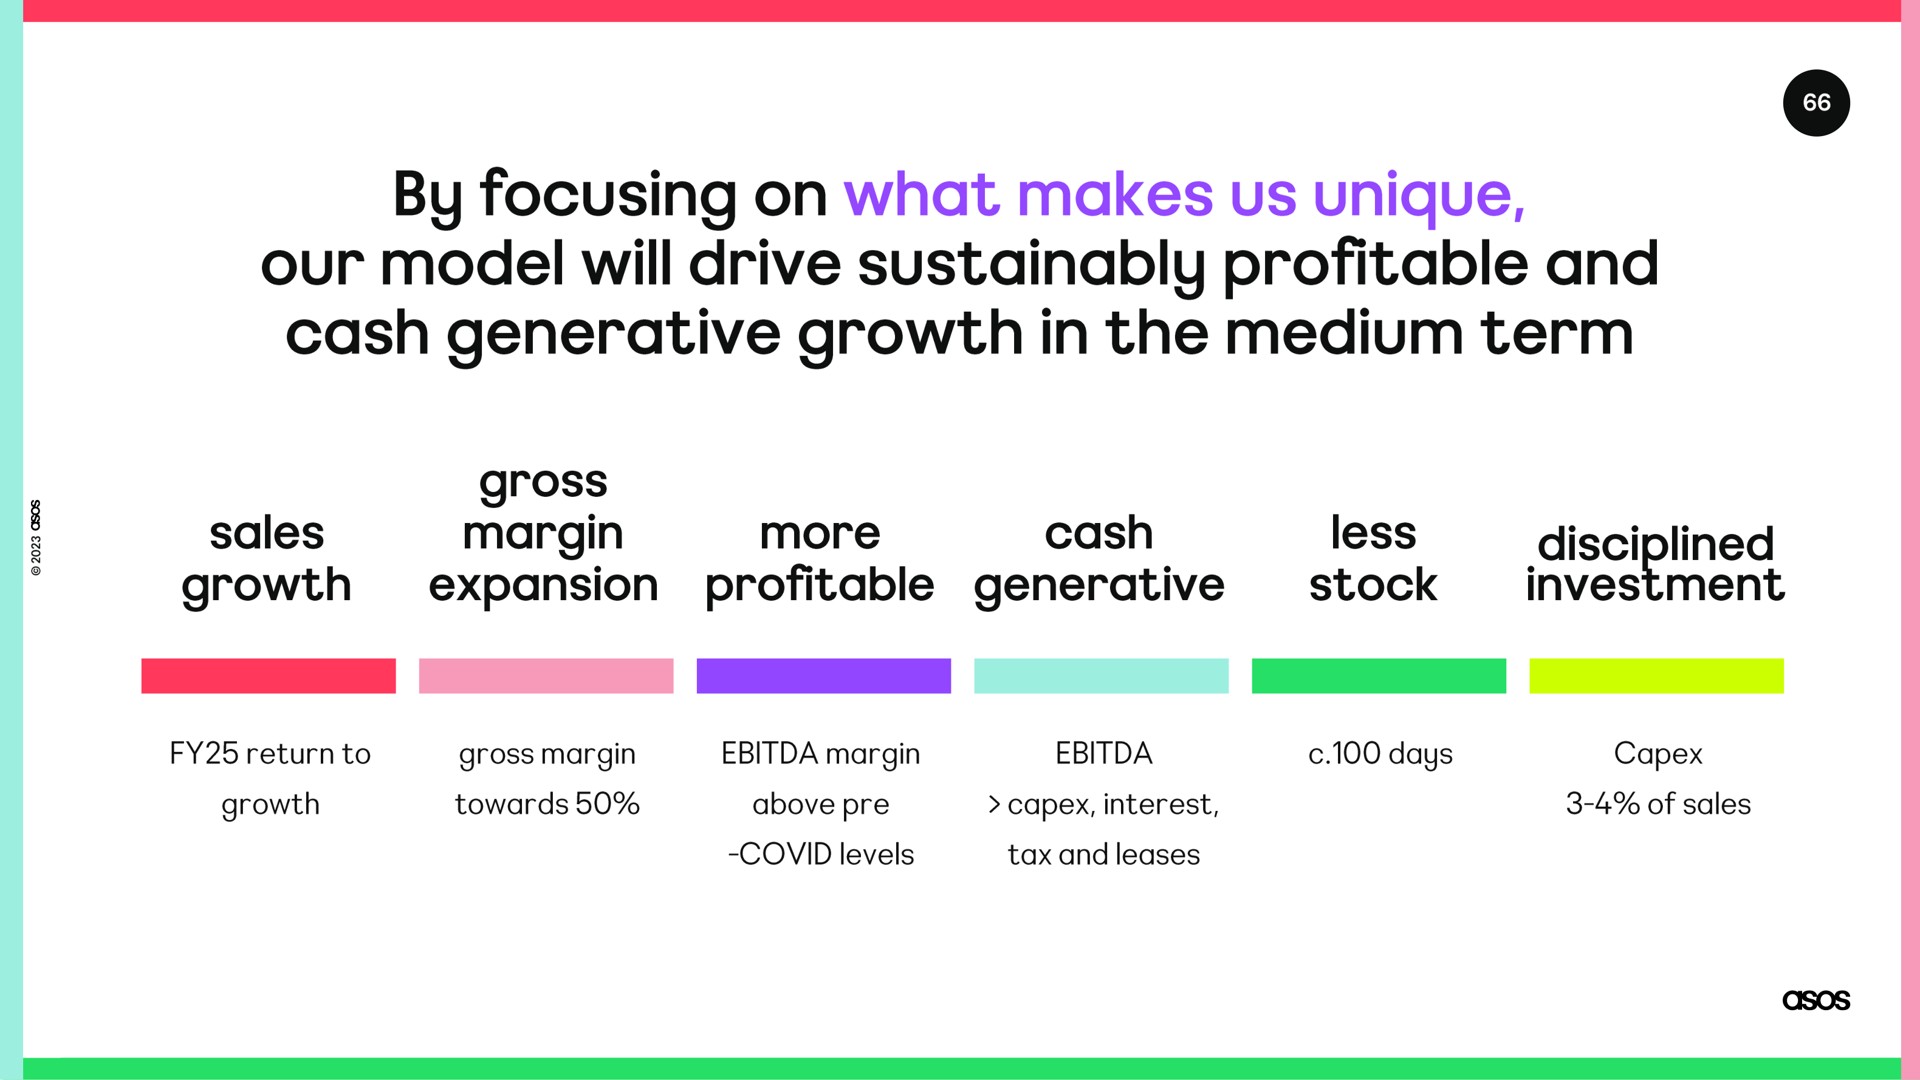 by focusing on what makes us unique our model will drive profitable and cash generative growth in the medium term sales growth margin expansion more cash profitable generative less stock disciplined investment | Asos